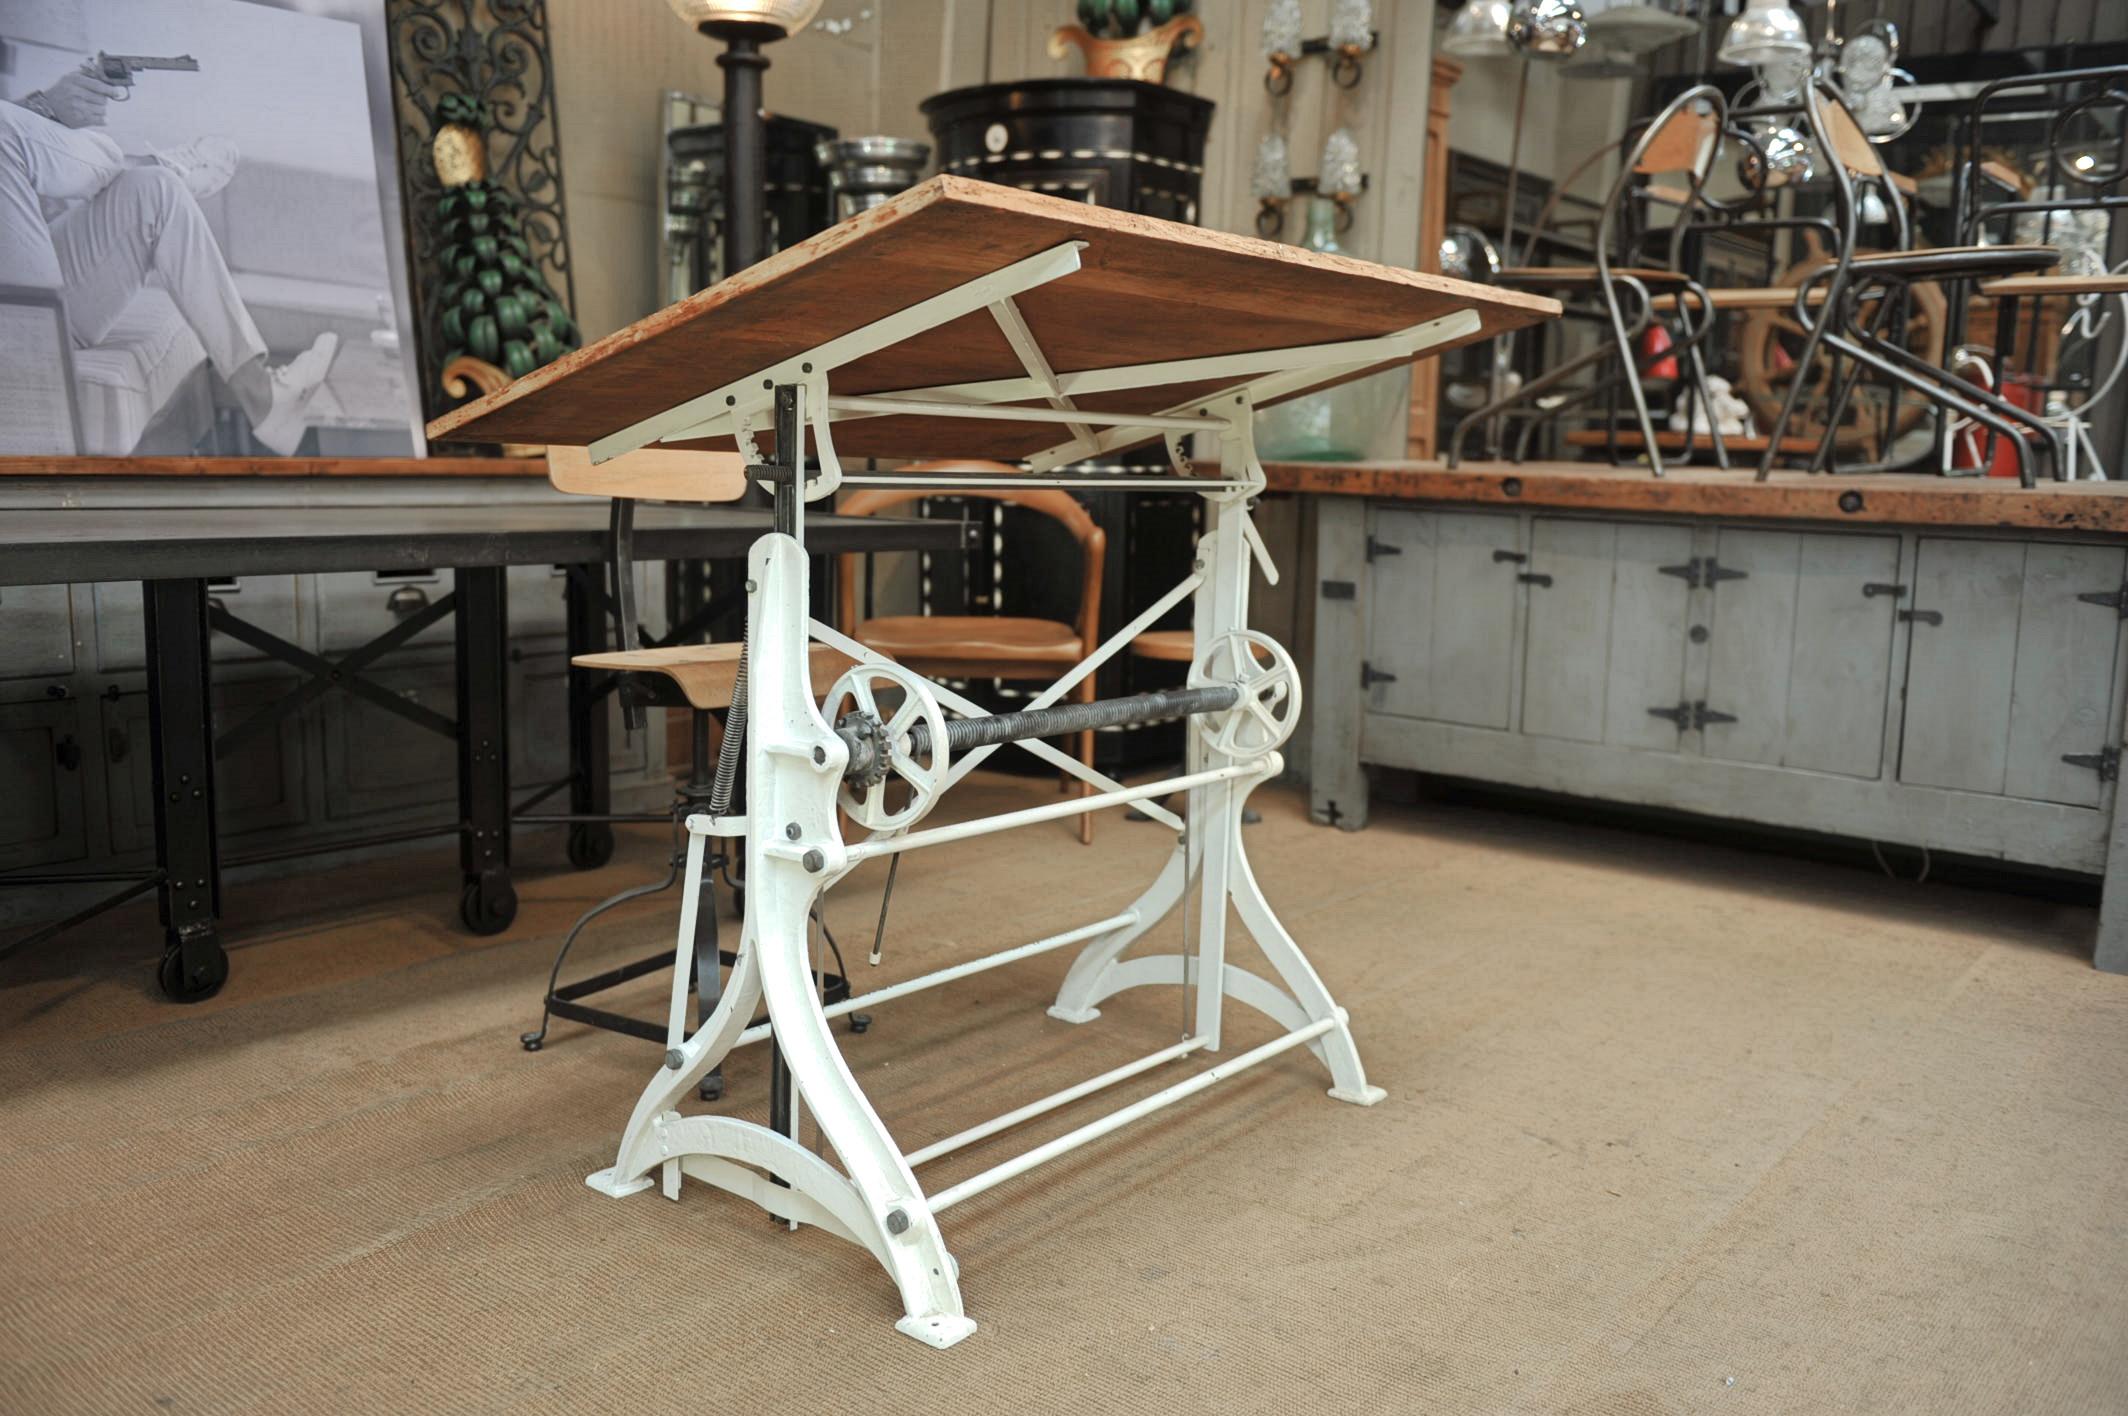 Pine top and white vintage color cast iron base French adjustable architect's drafting table , desk or writing Table very stable in horizontal or all desk position), circa 1900
goes up and down with foot pedal and lean very easily with side handle